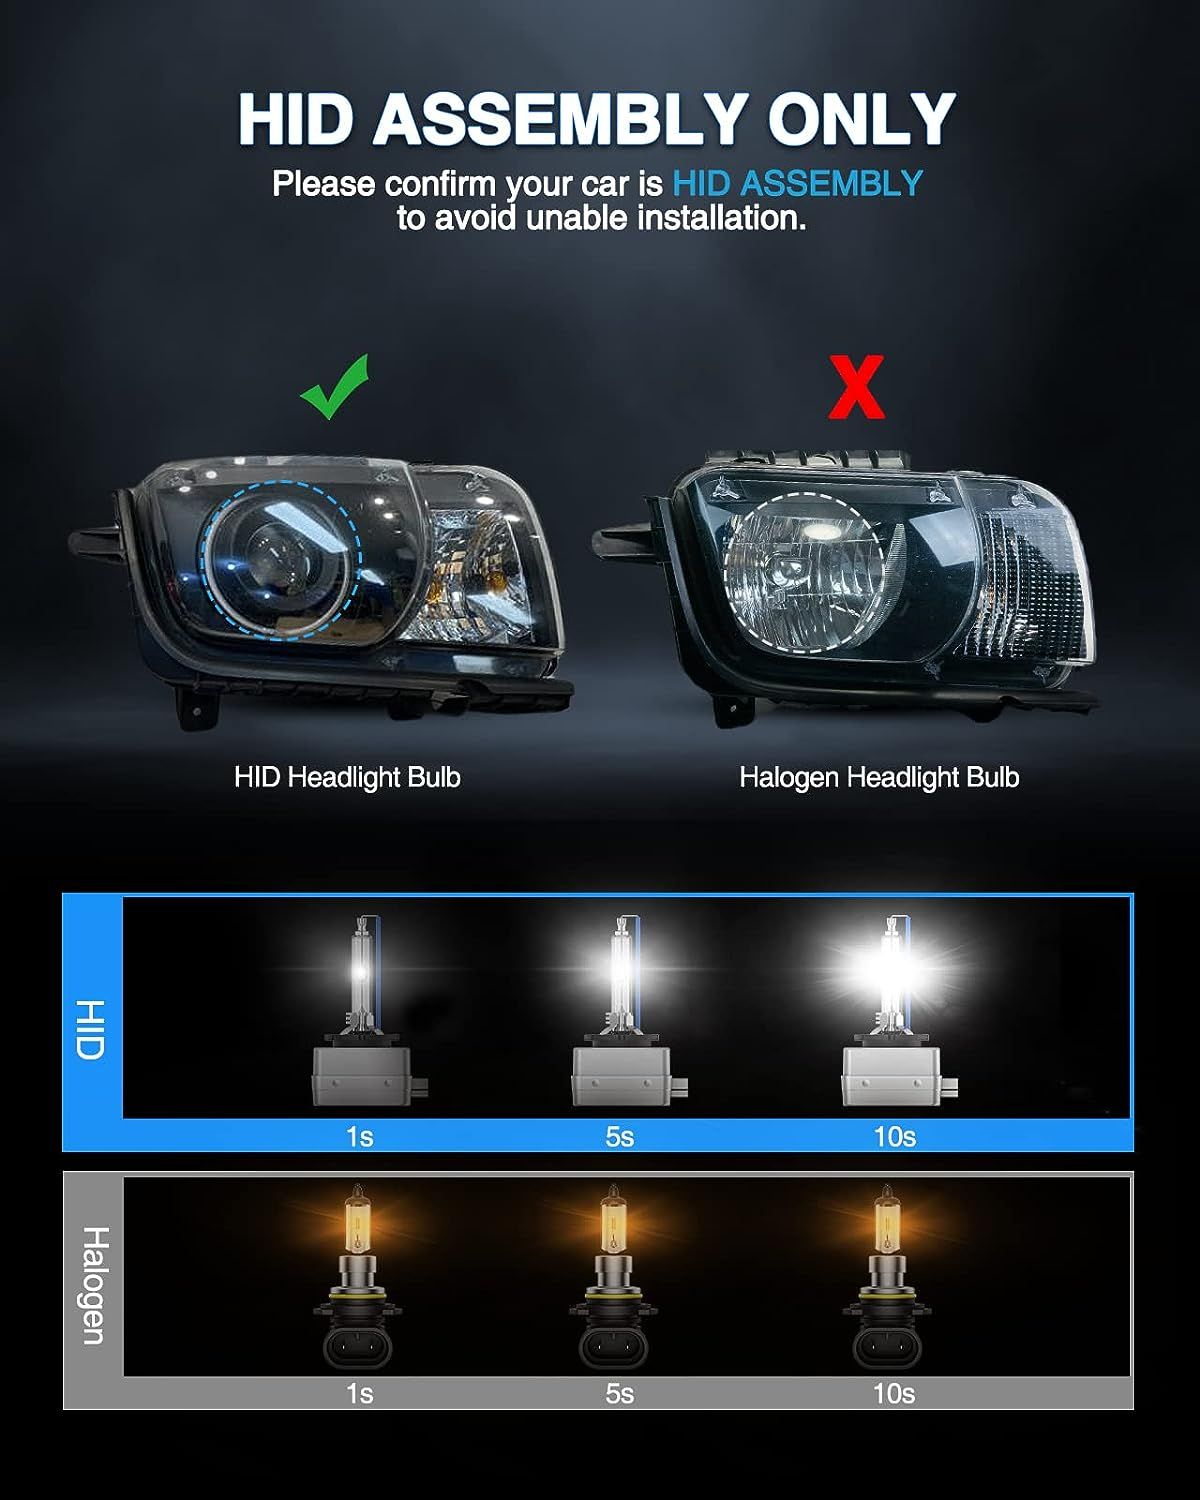 【2 PCS】 HID Bulbs, 6000K Cold White, Xenon Replacement Bulb, 4500 Hours Longevity, Waterproof Design, Up to 350% Brightness